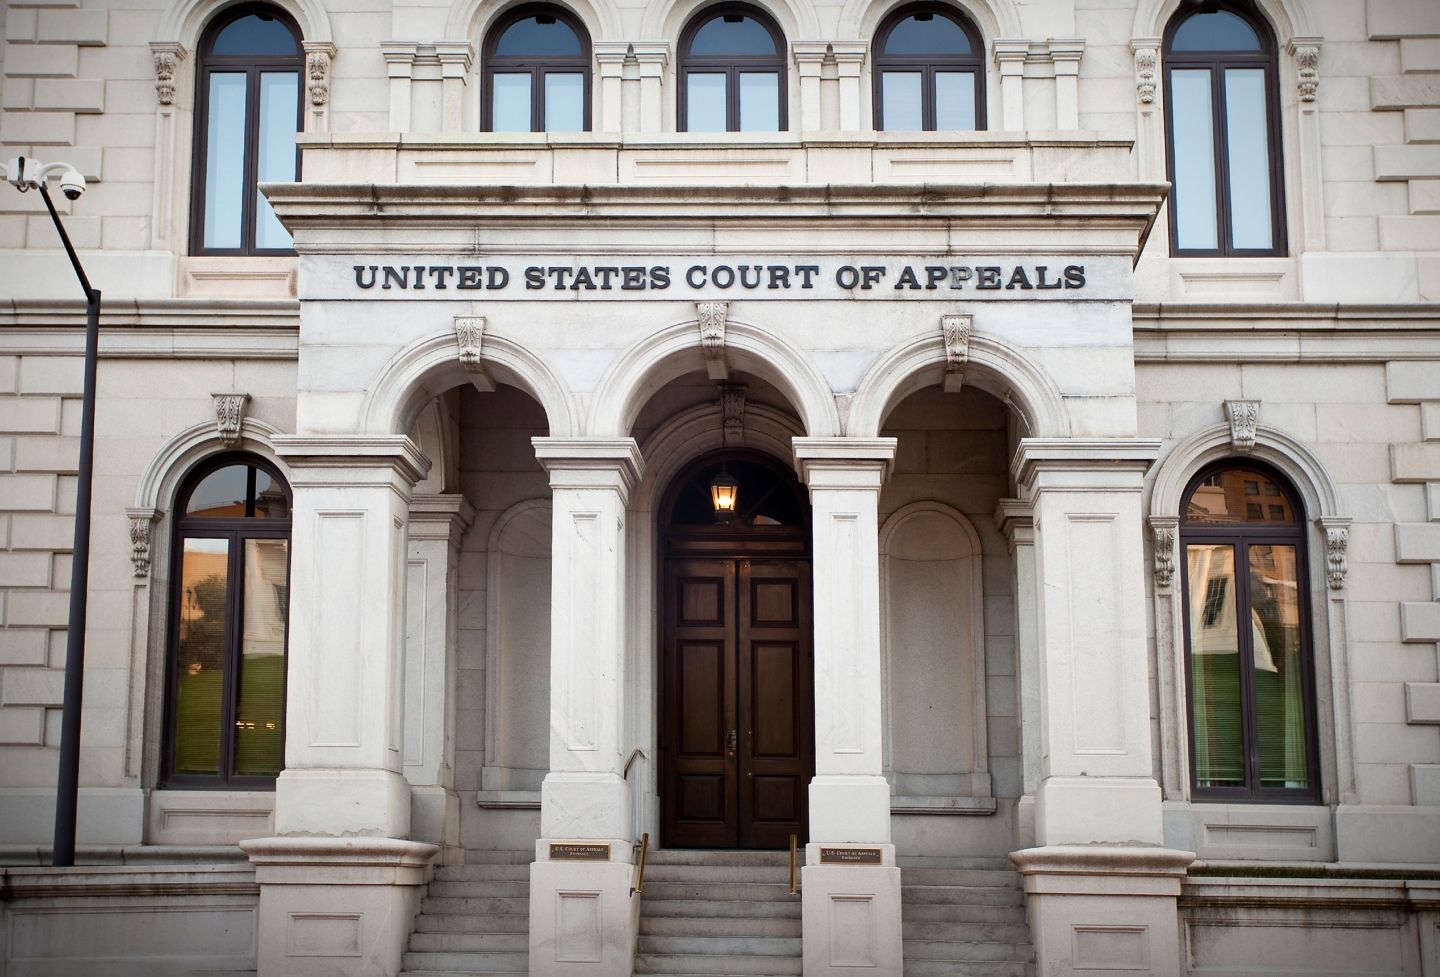 4th Circuit courthouse